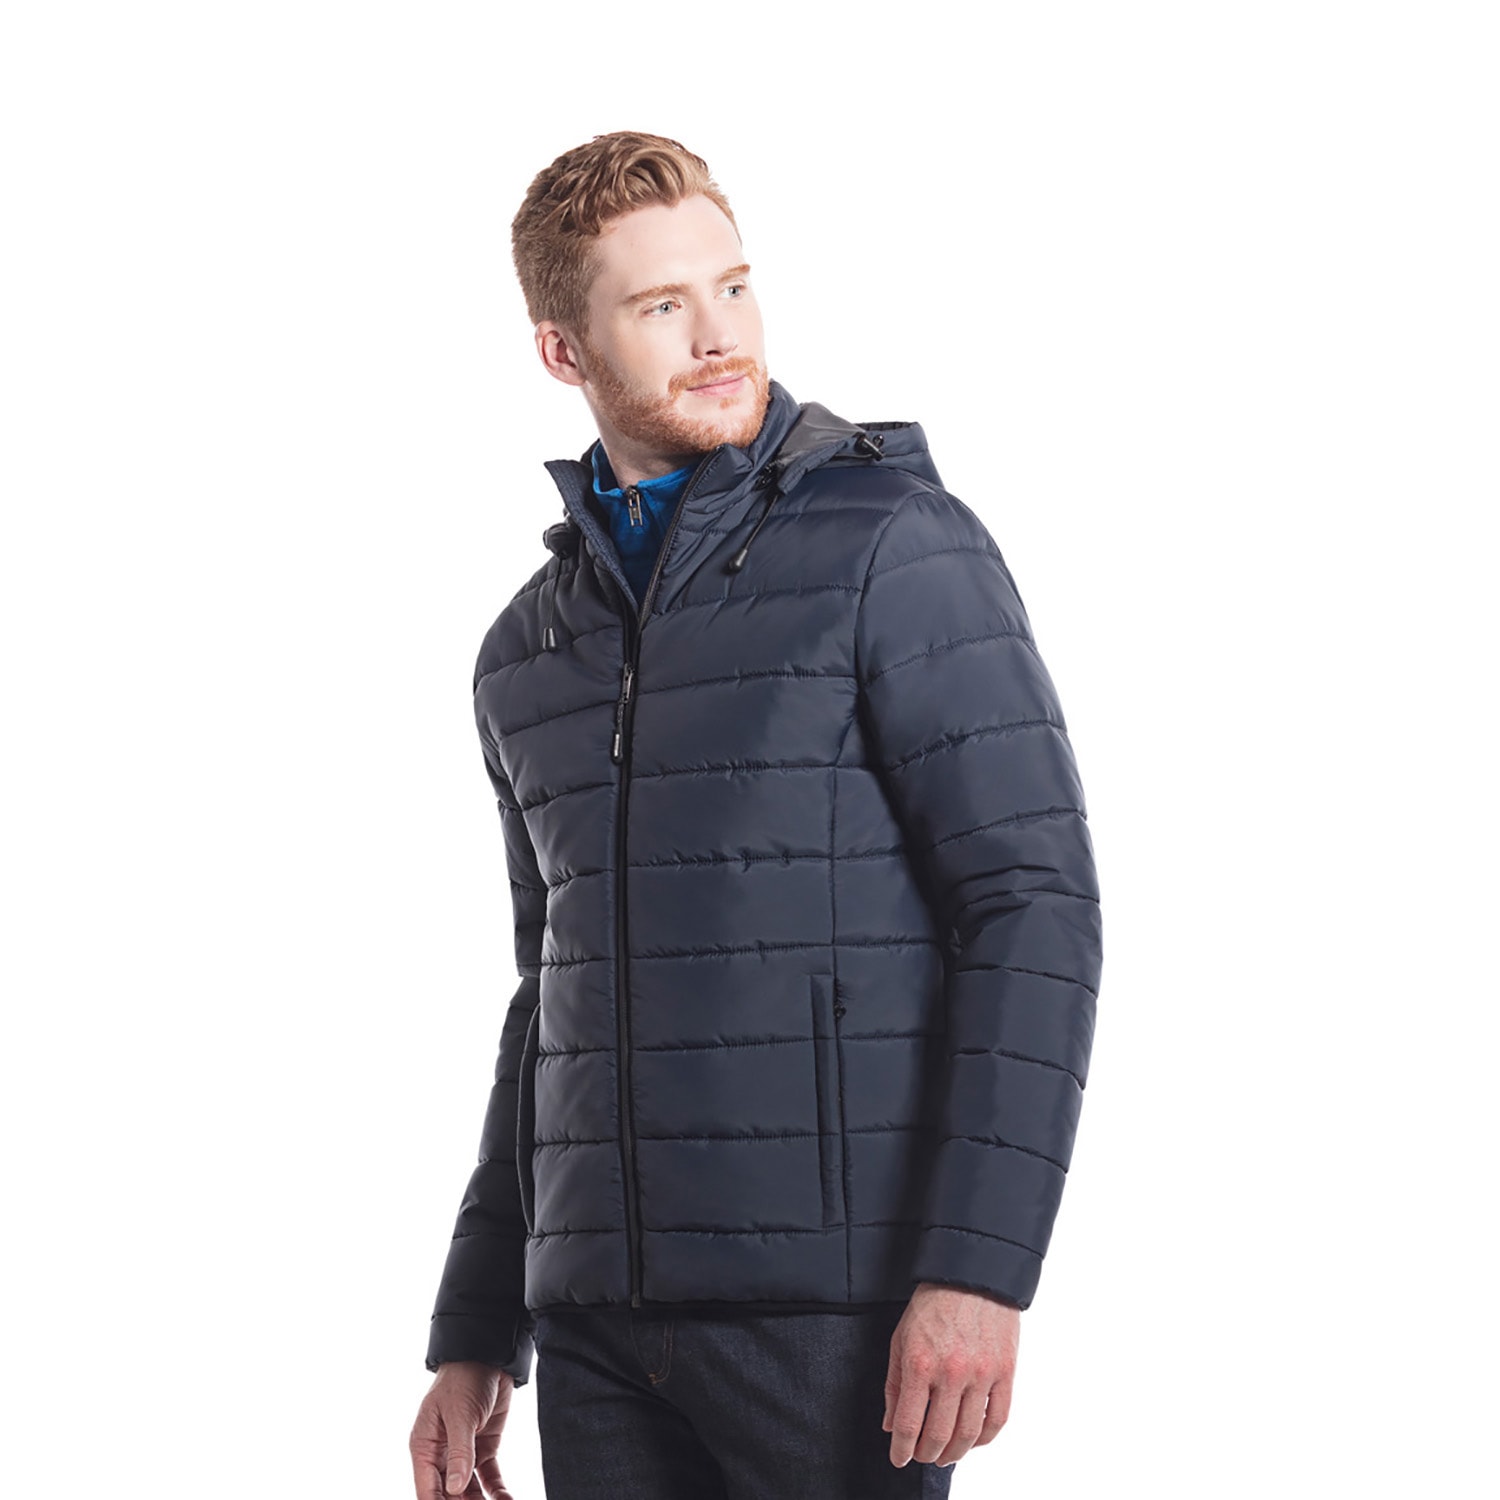 https://workcasualwear.ca/images/thumbs/0002115_cx2-glacial-puffy-jacket-with-detachable-hood.jpeg